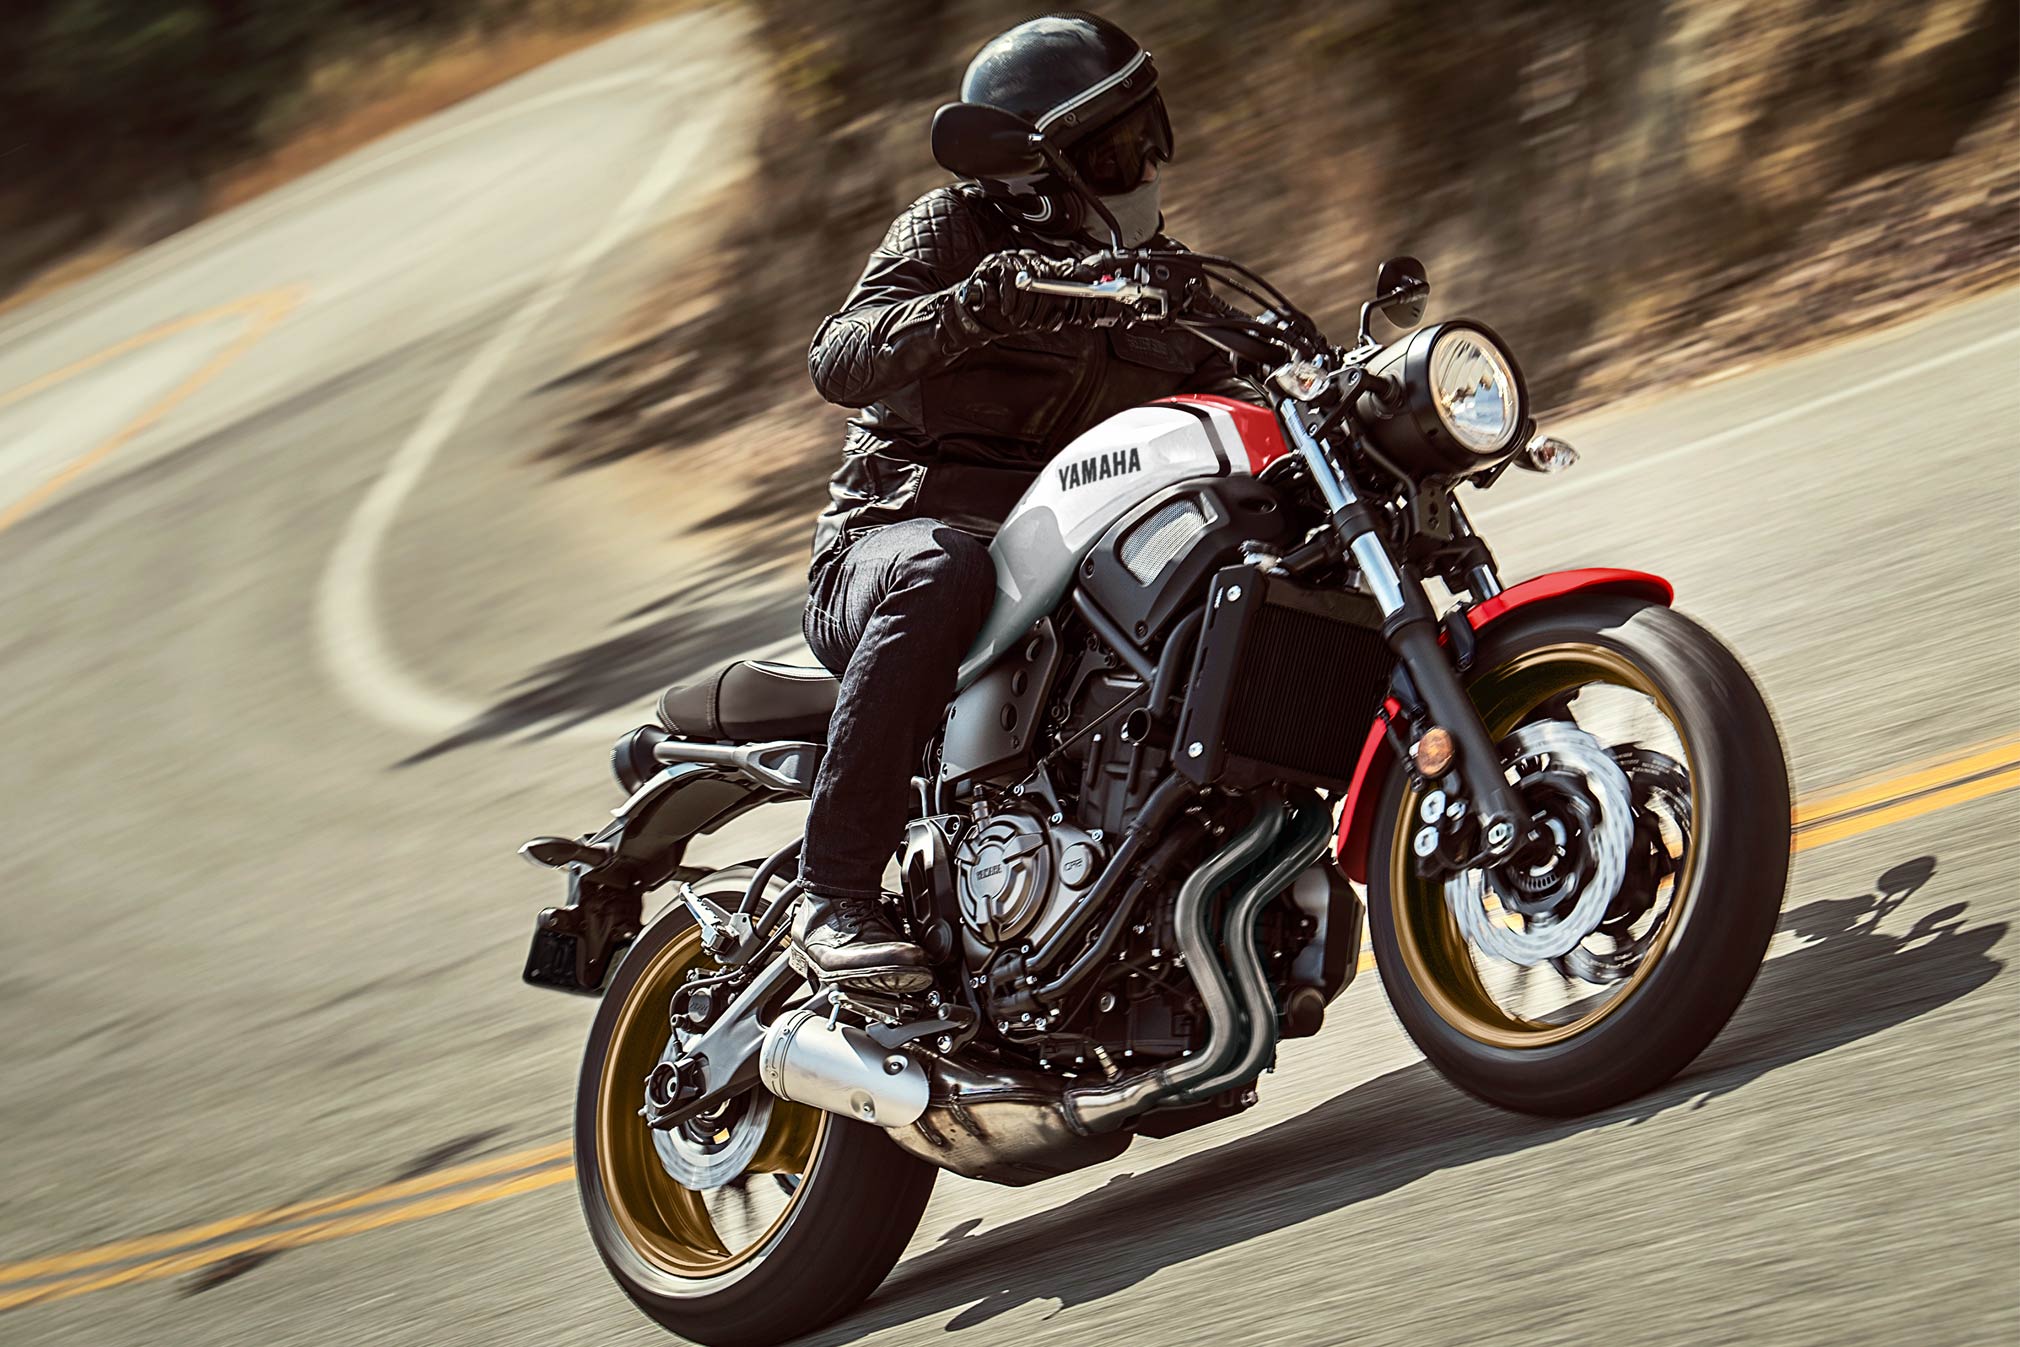 2019 Yamaha XSR900 Guide • Total Motorcycle